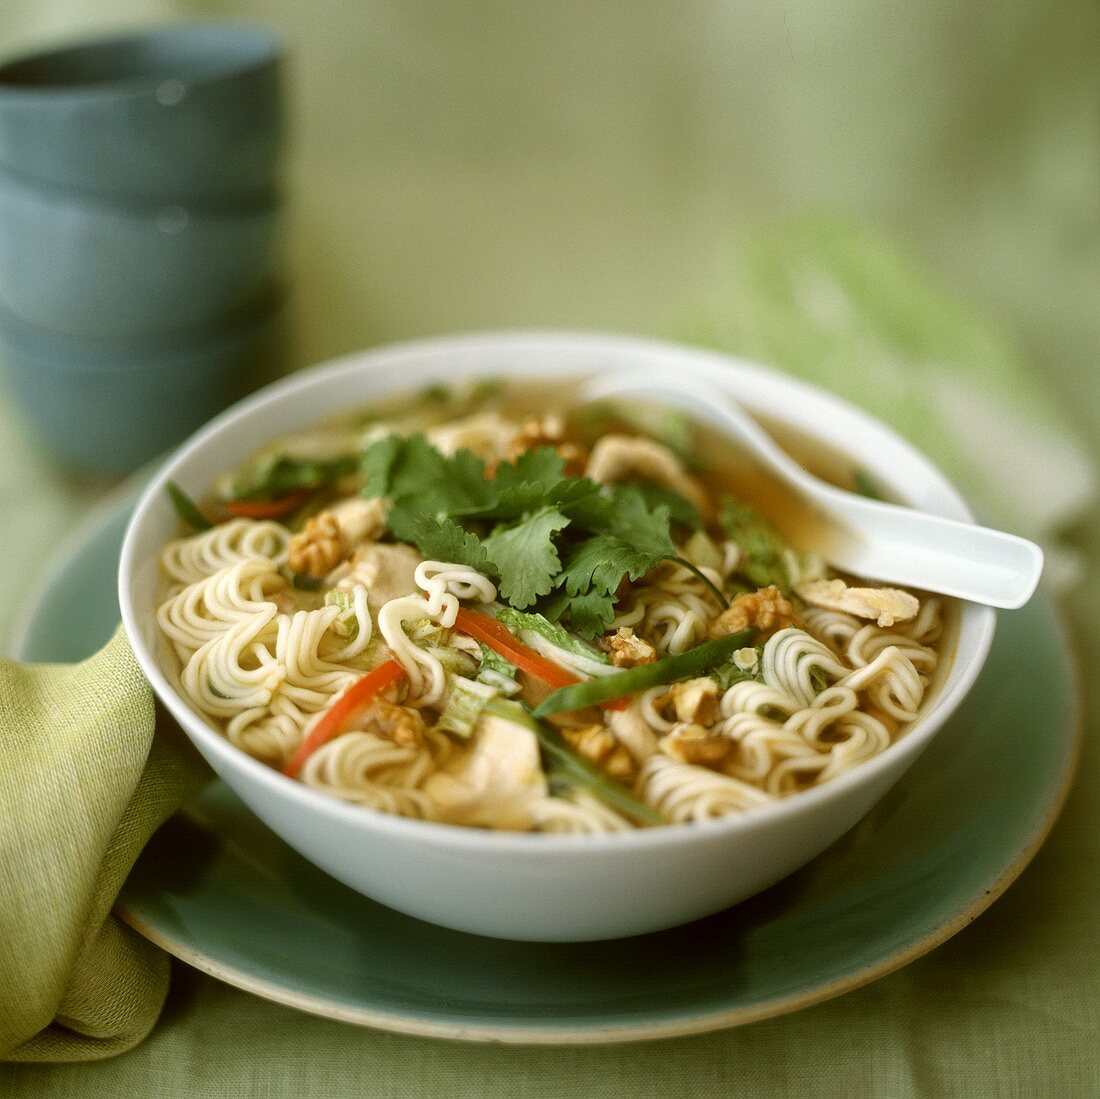 Noodle soup with chicken, nuts and coriander leaves